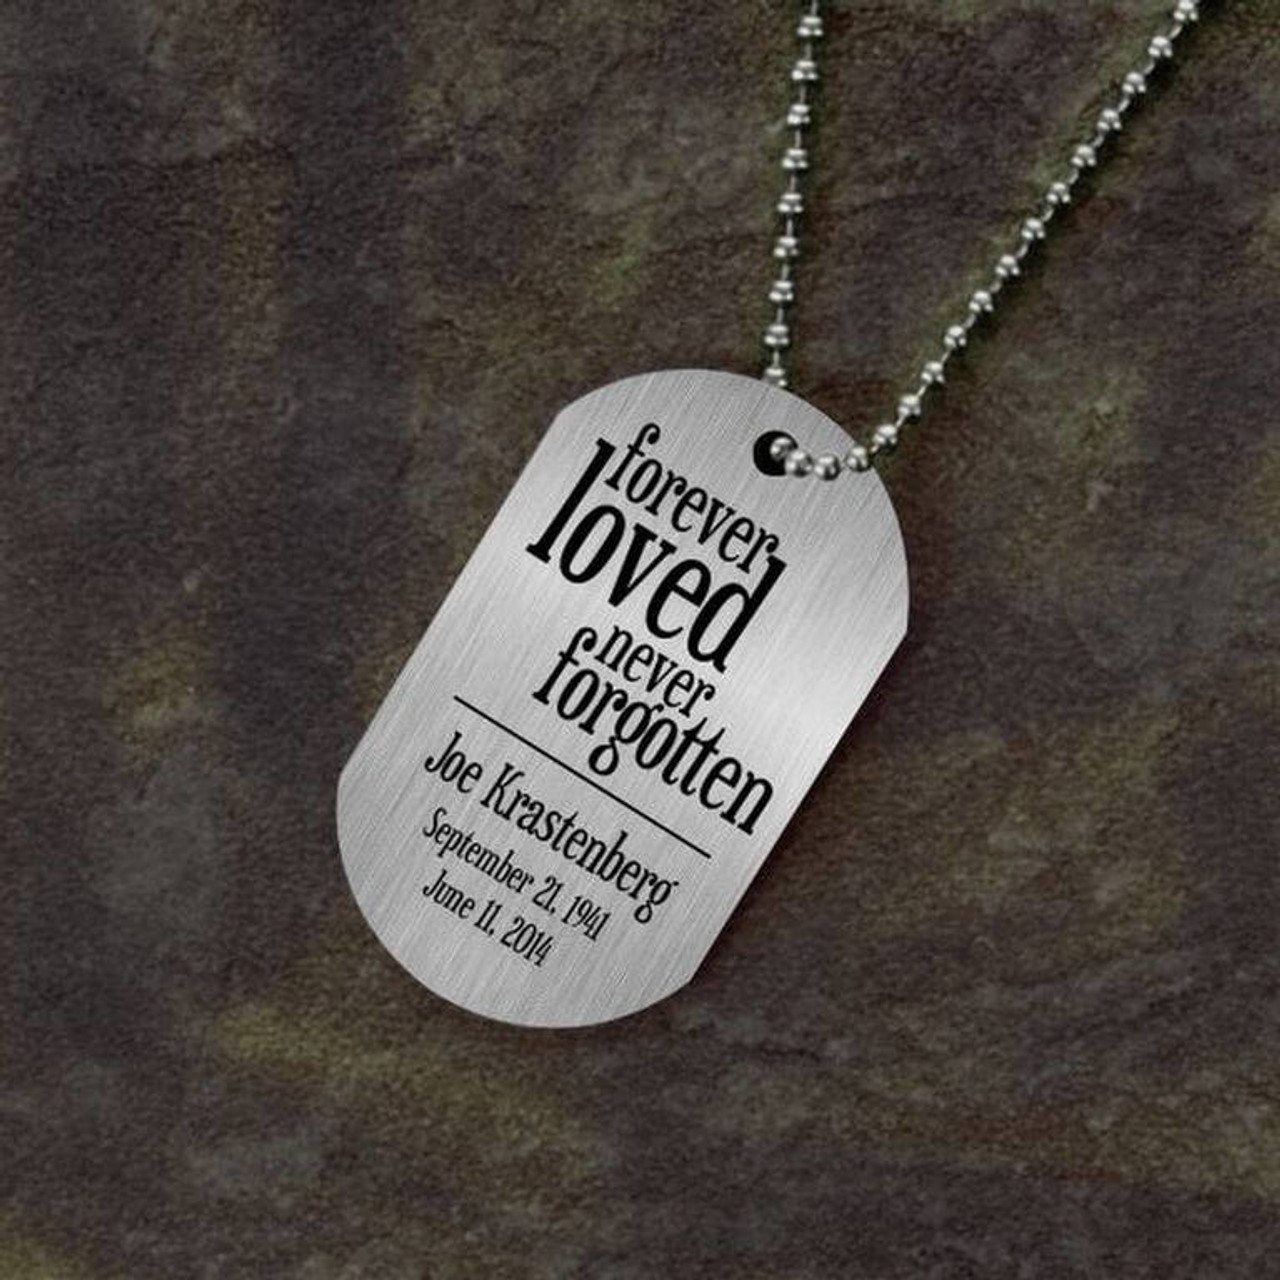 Buy Army Dog Tags with Engraving at the best price of $ 12.99 Kids